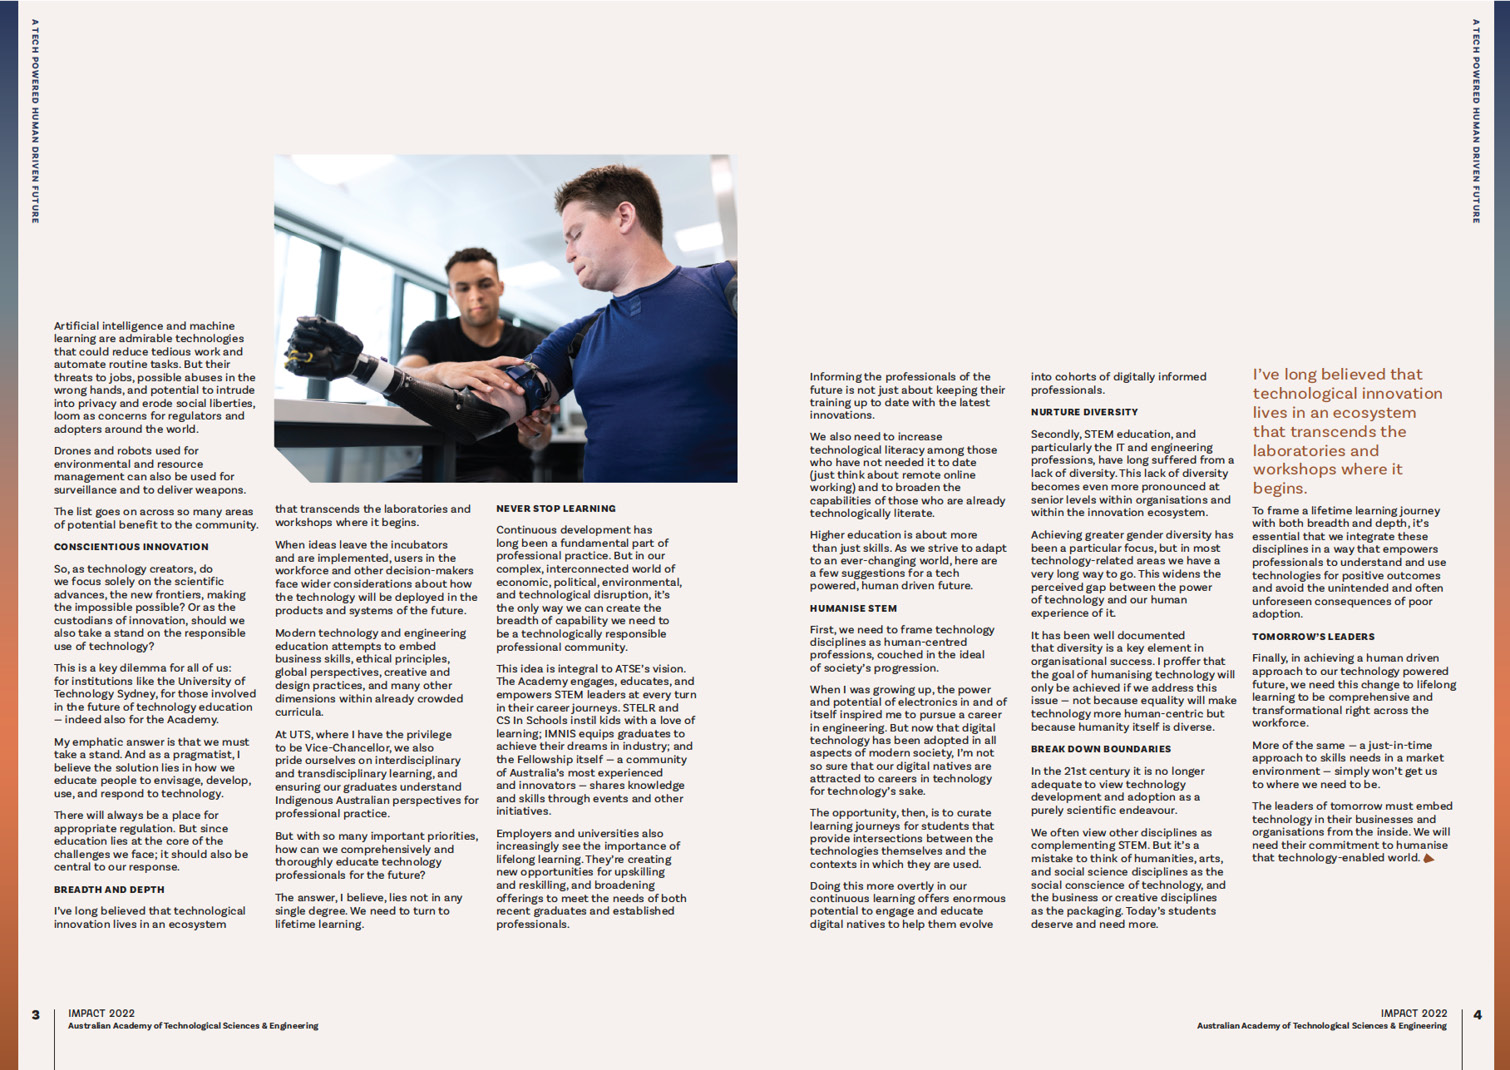 Making human driven technologists article page 2